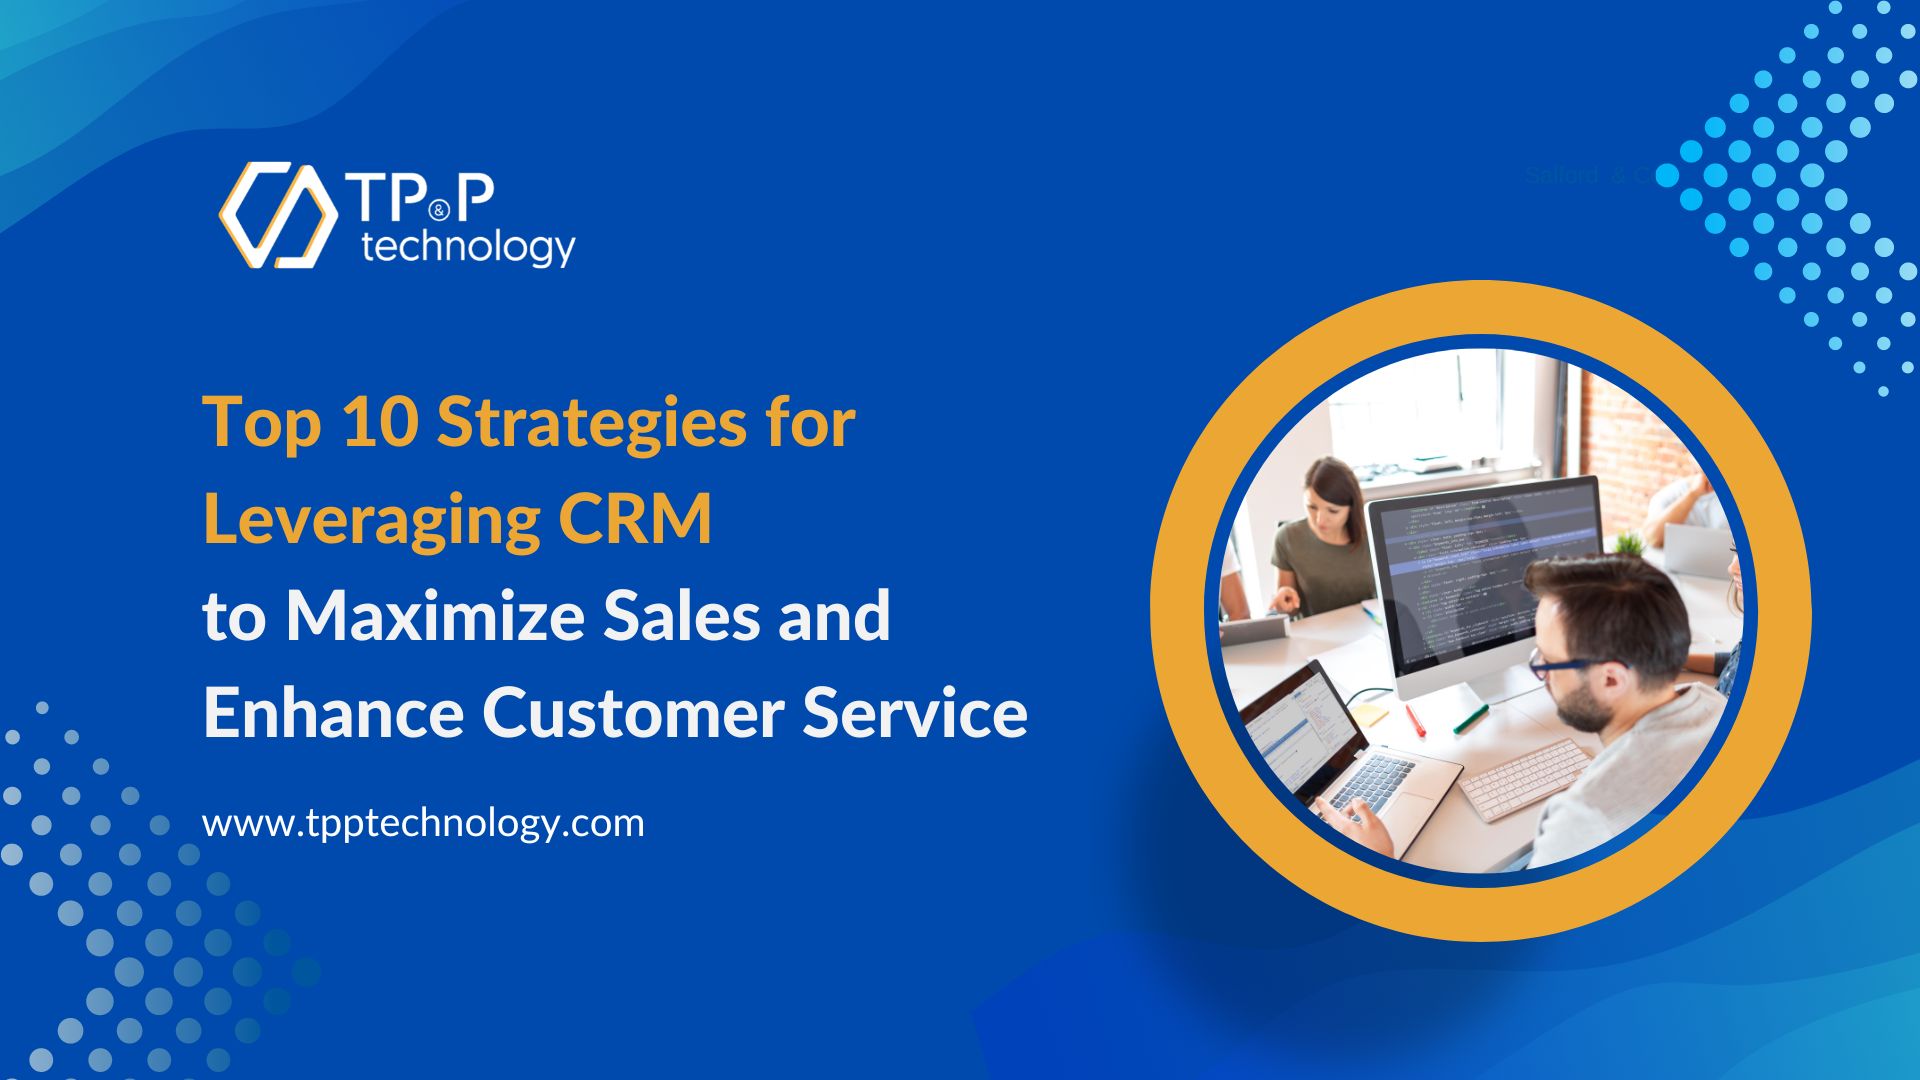 Top 10 Strategies for Leveraging CRM  to Maximize Sales and Enhance Customer Service 